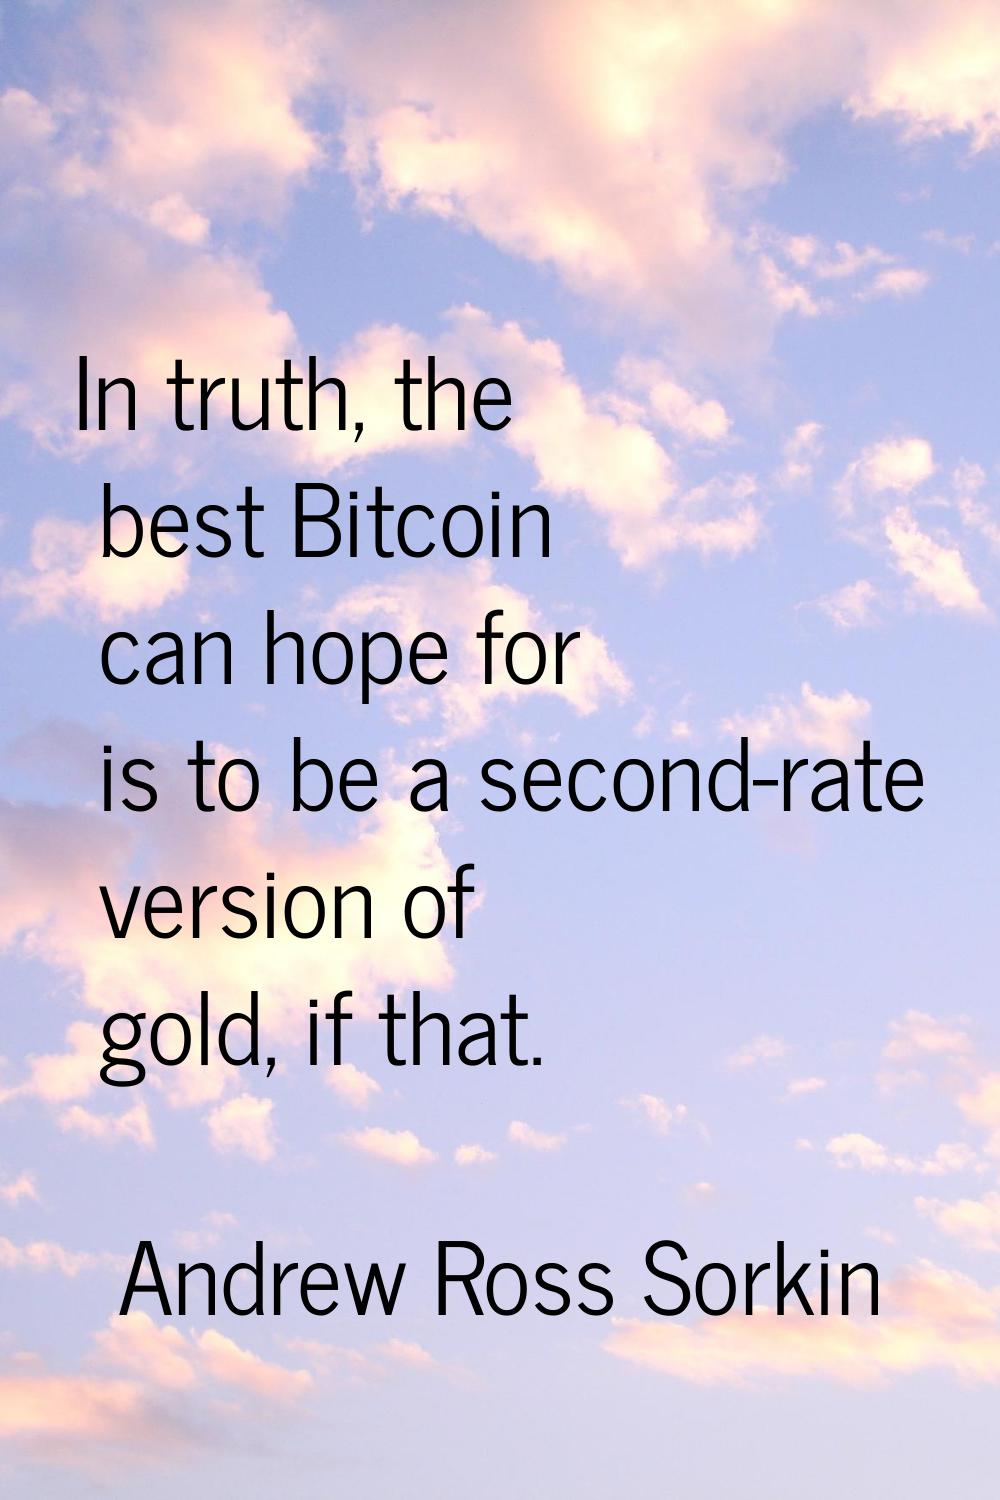 In truth, the best Bitcoin can hope for is to be a second-rate version of gold, if that.